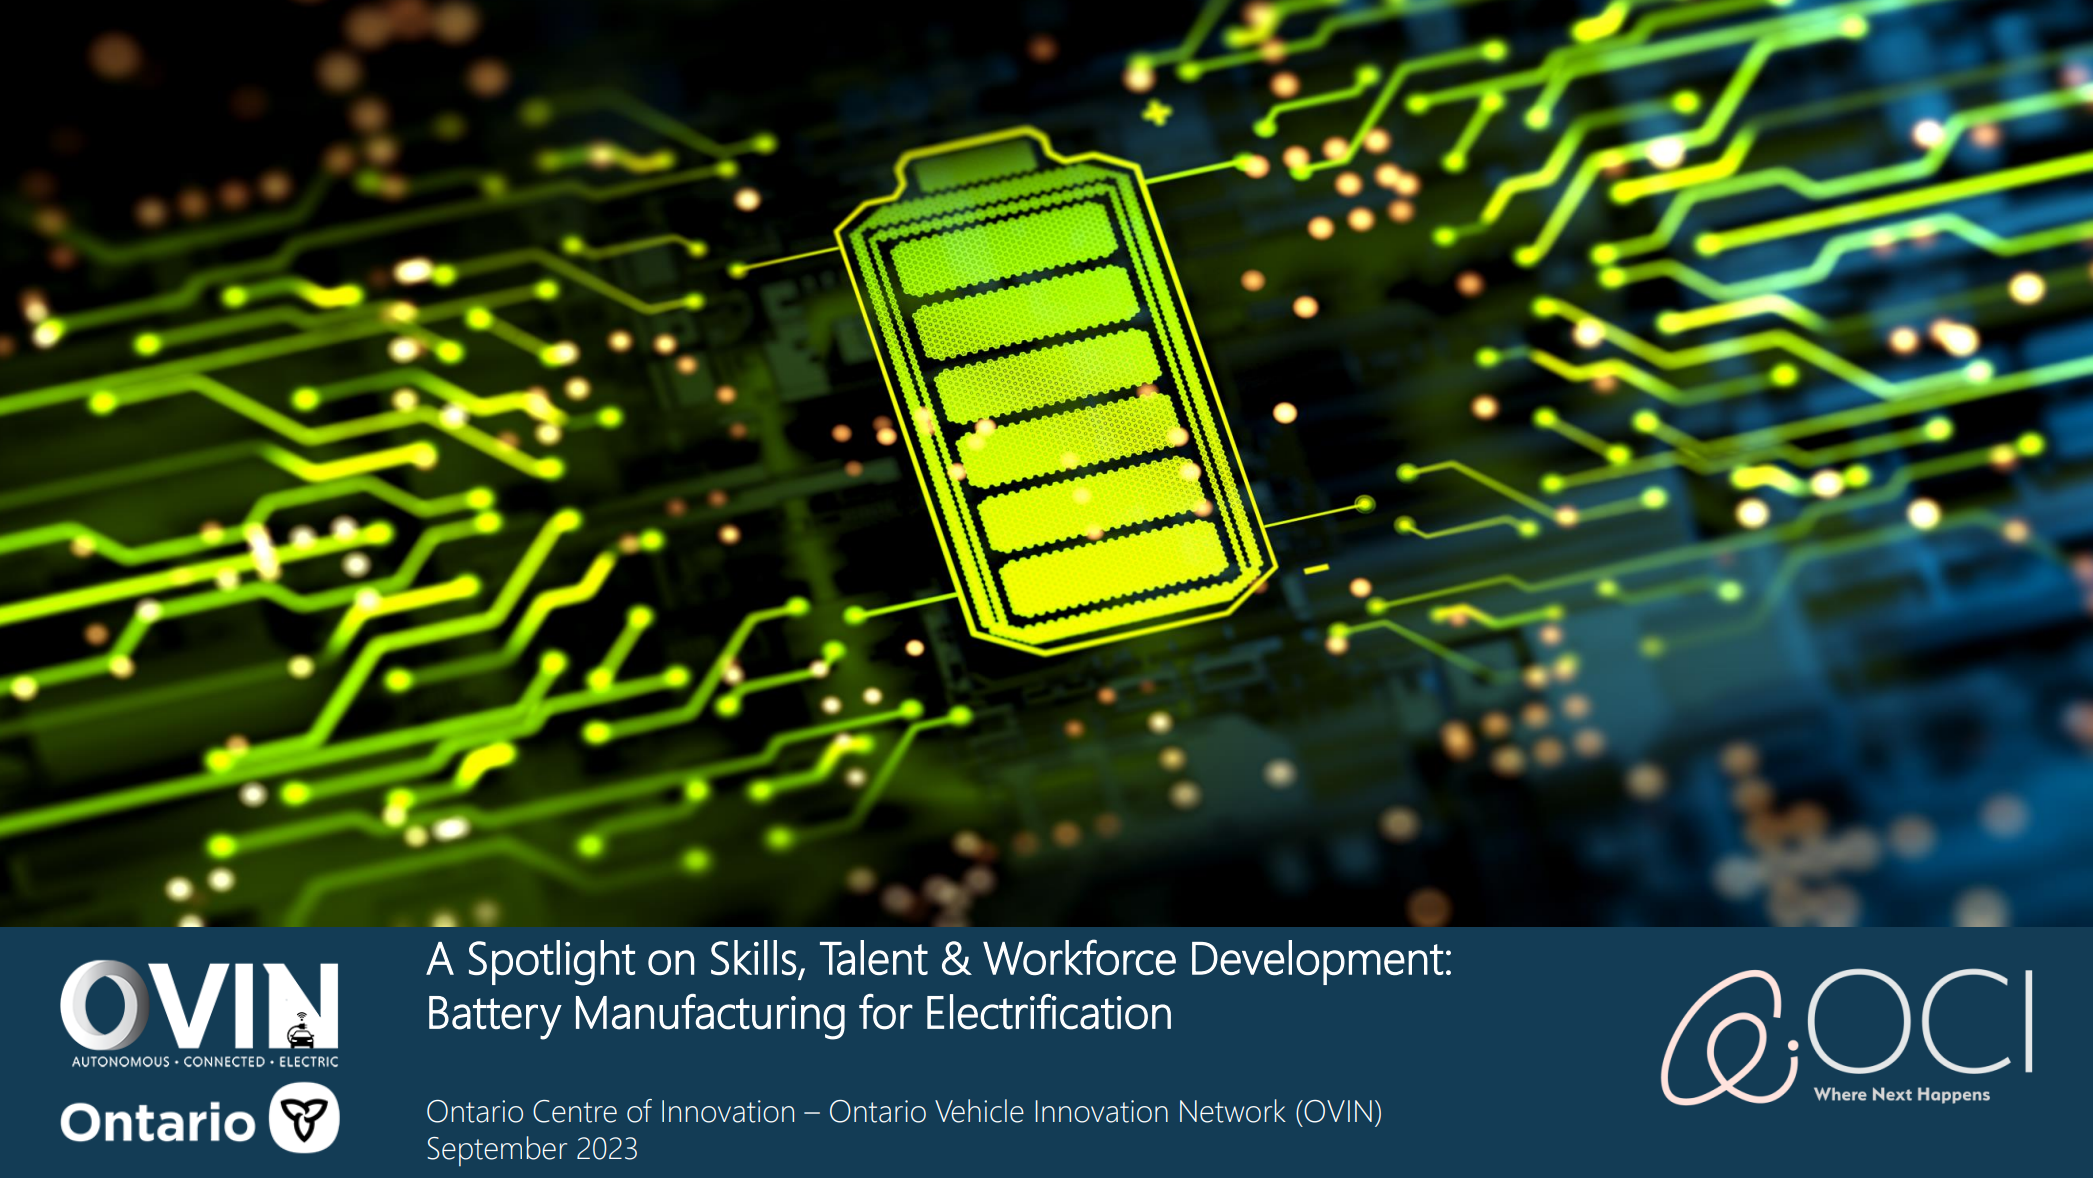 A Spotlight on Skills, Talent & Workforce Development: Battery Manufacturing for Electrification